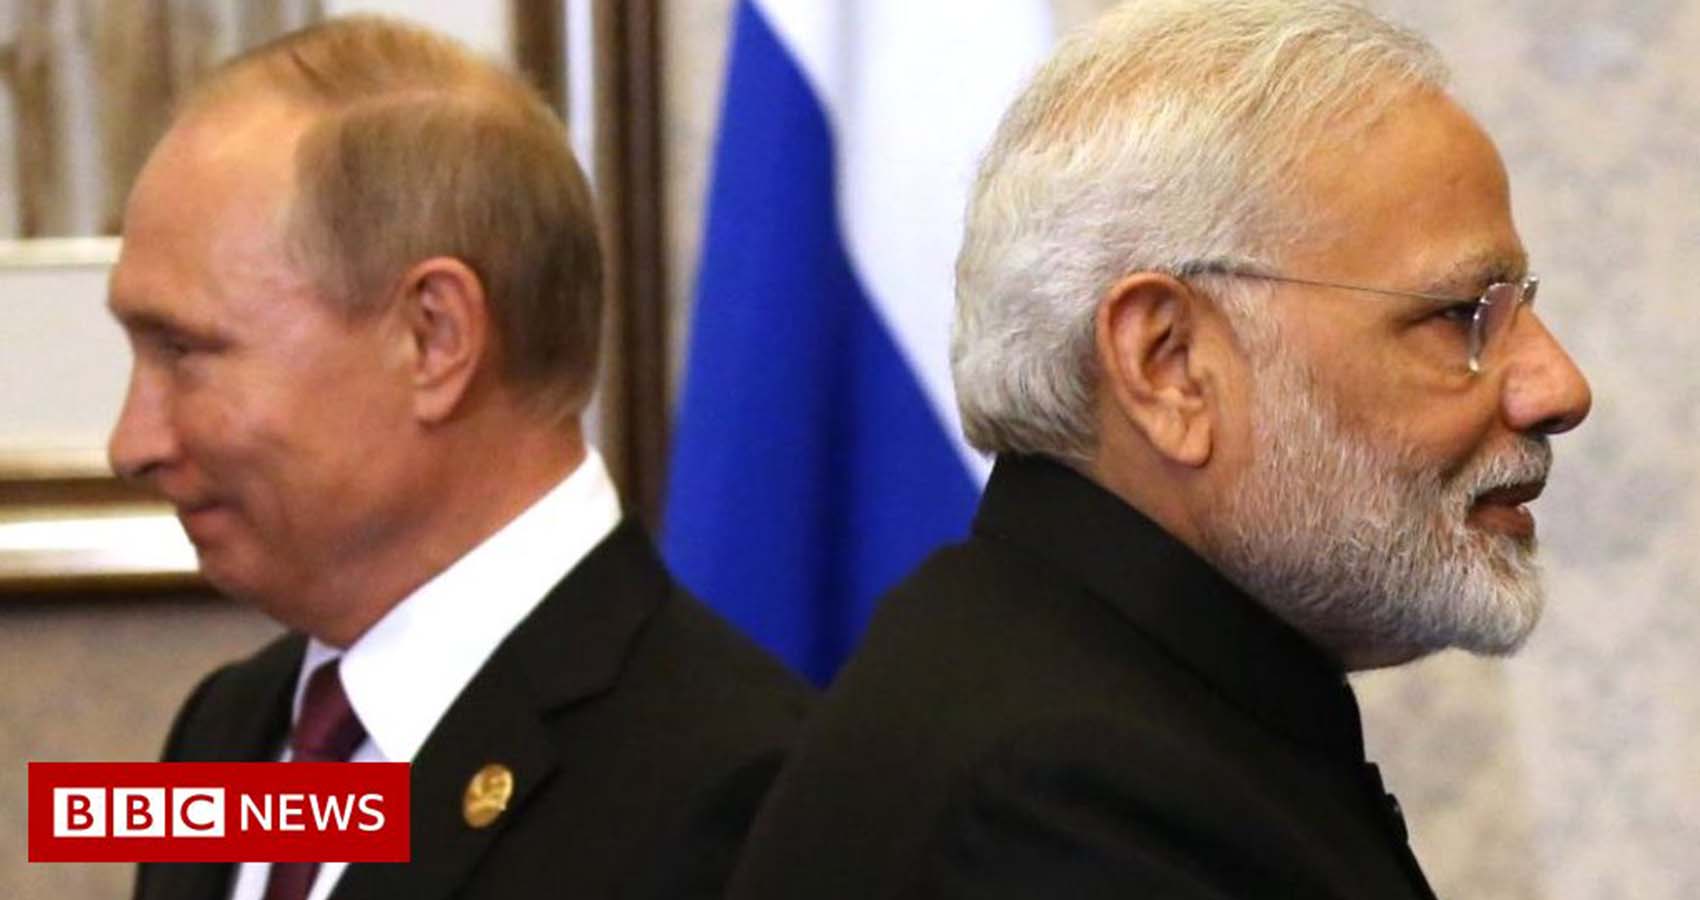 India Critical Of Russian Invasion, But Will Not Name It